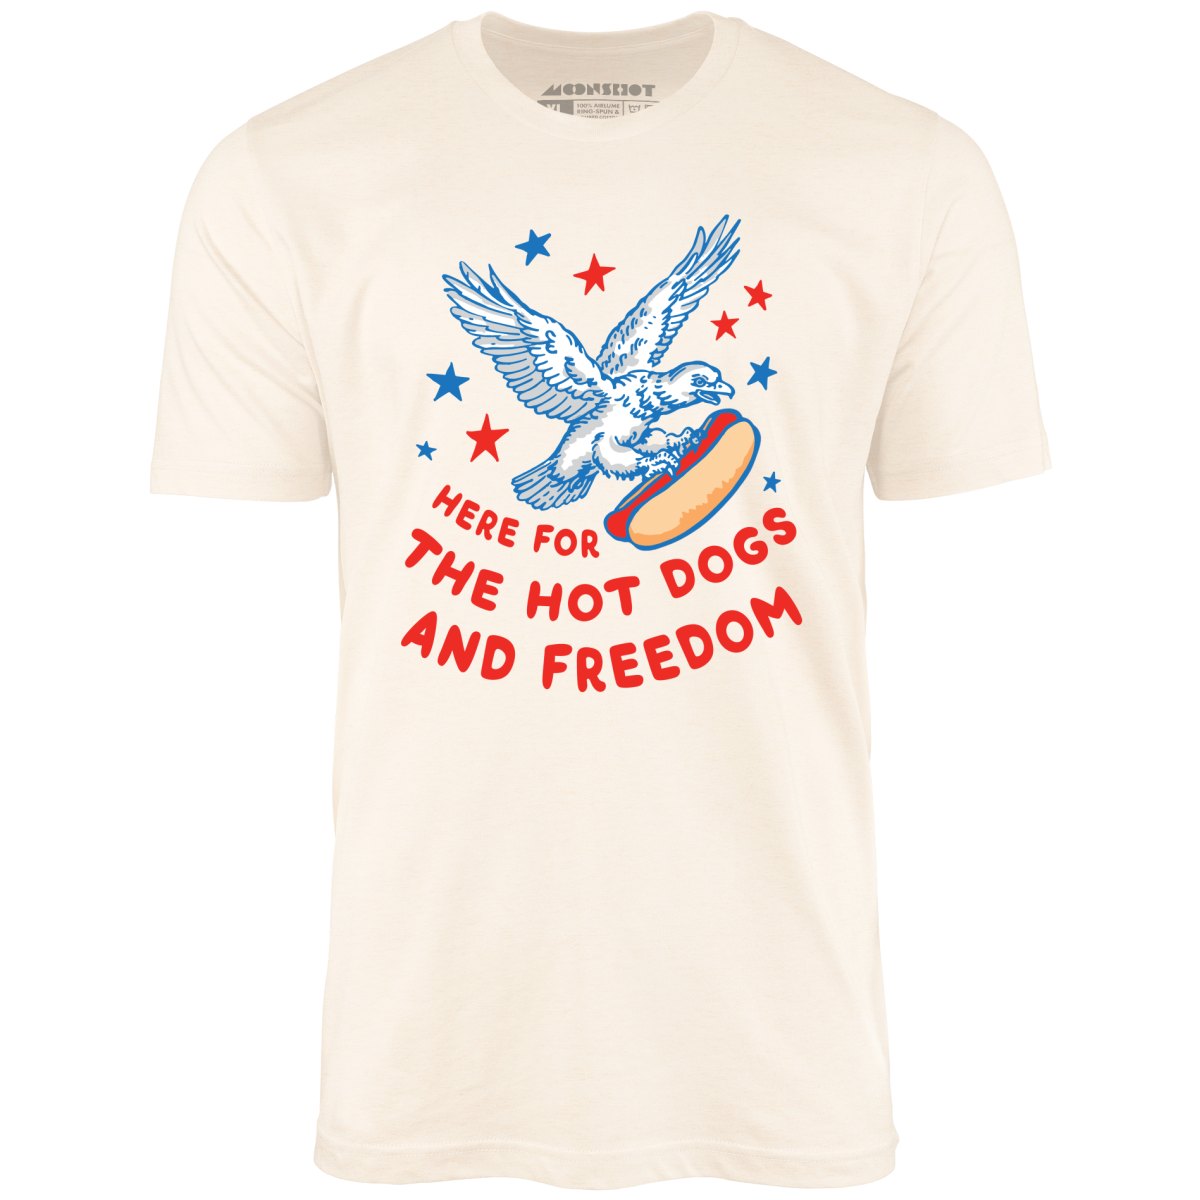 Here For The Hot Dogs and Freedom - Unisex T-Shirt